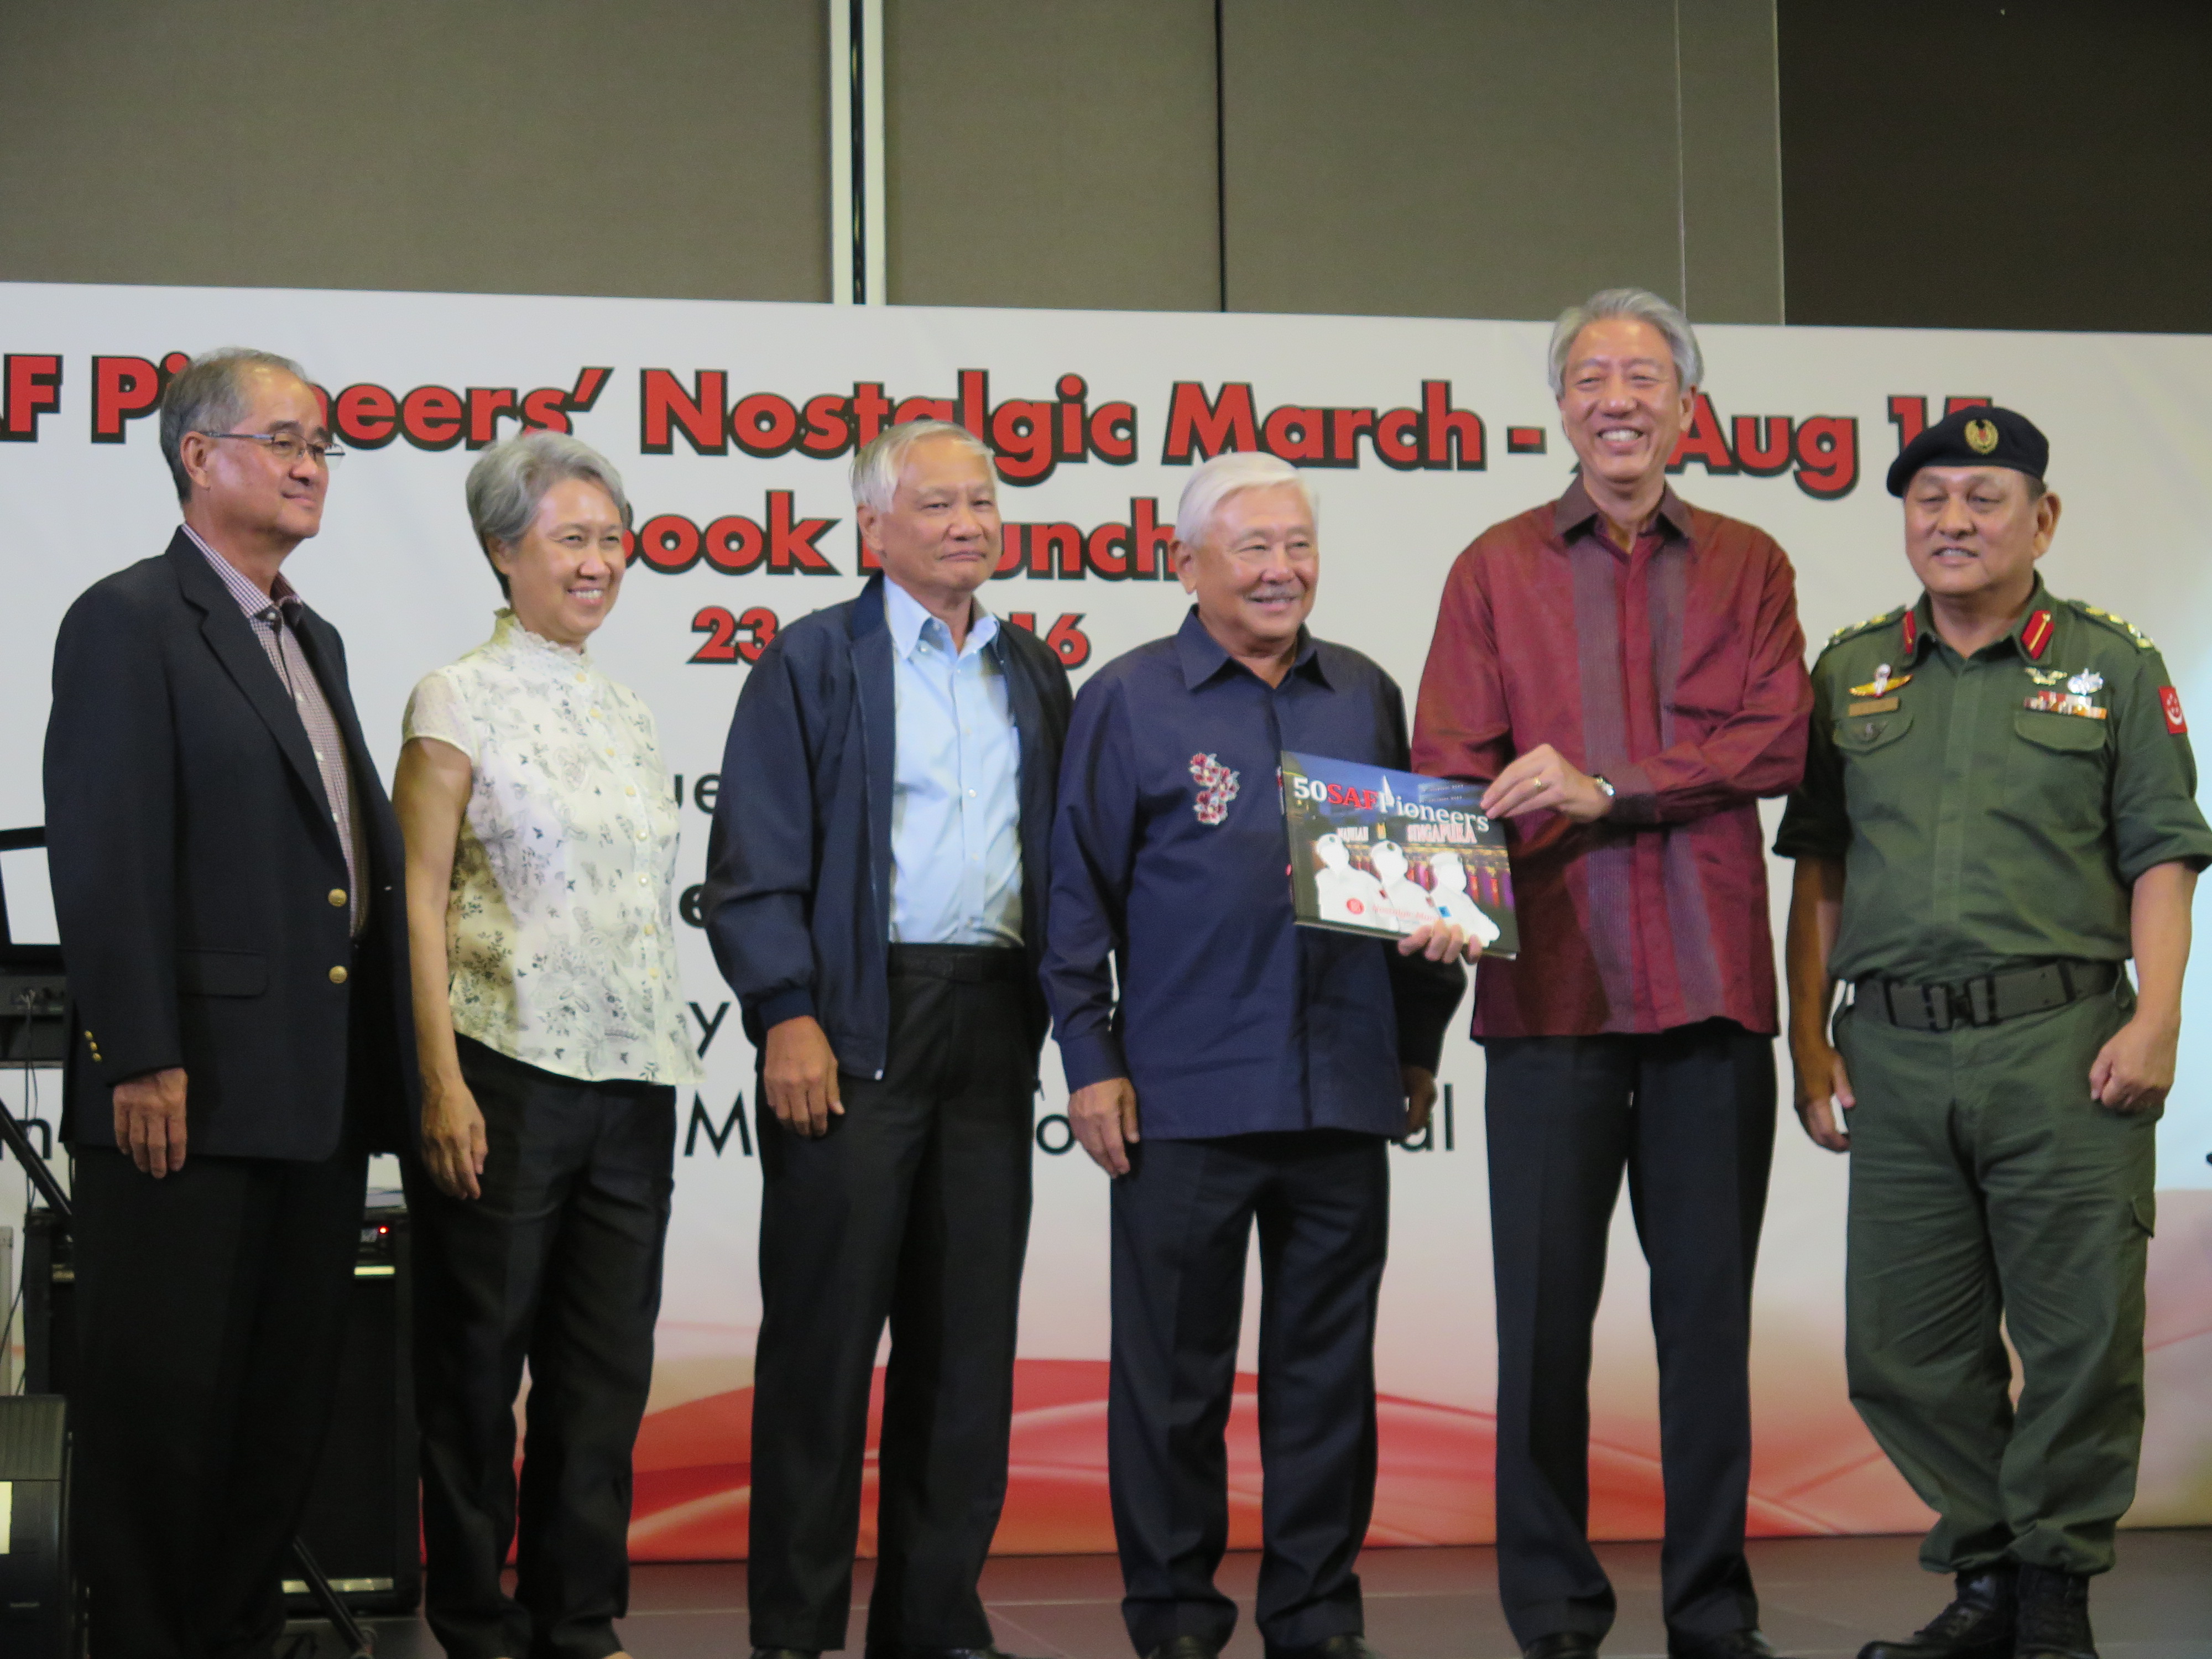 DPM Teo Chee Hean at Book Launch of 50 SAF Pioneers on 23 Jul 2016